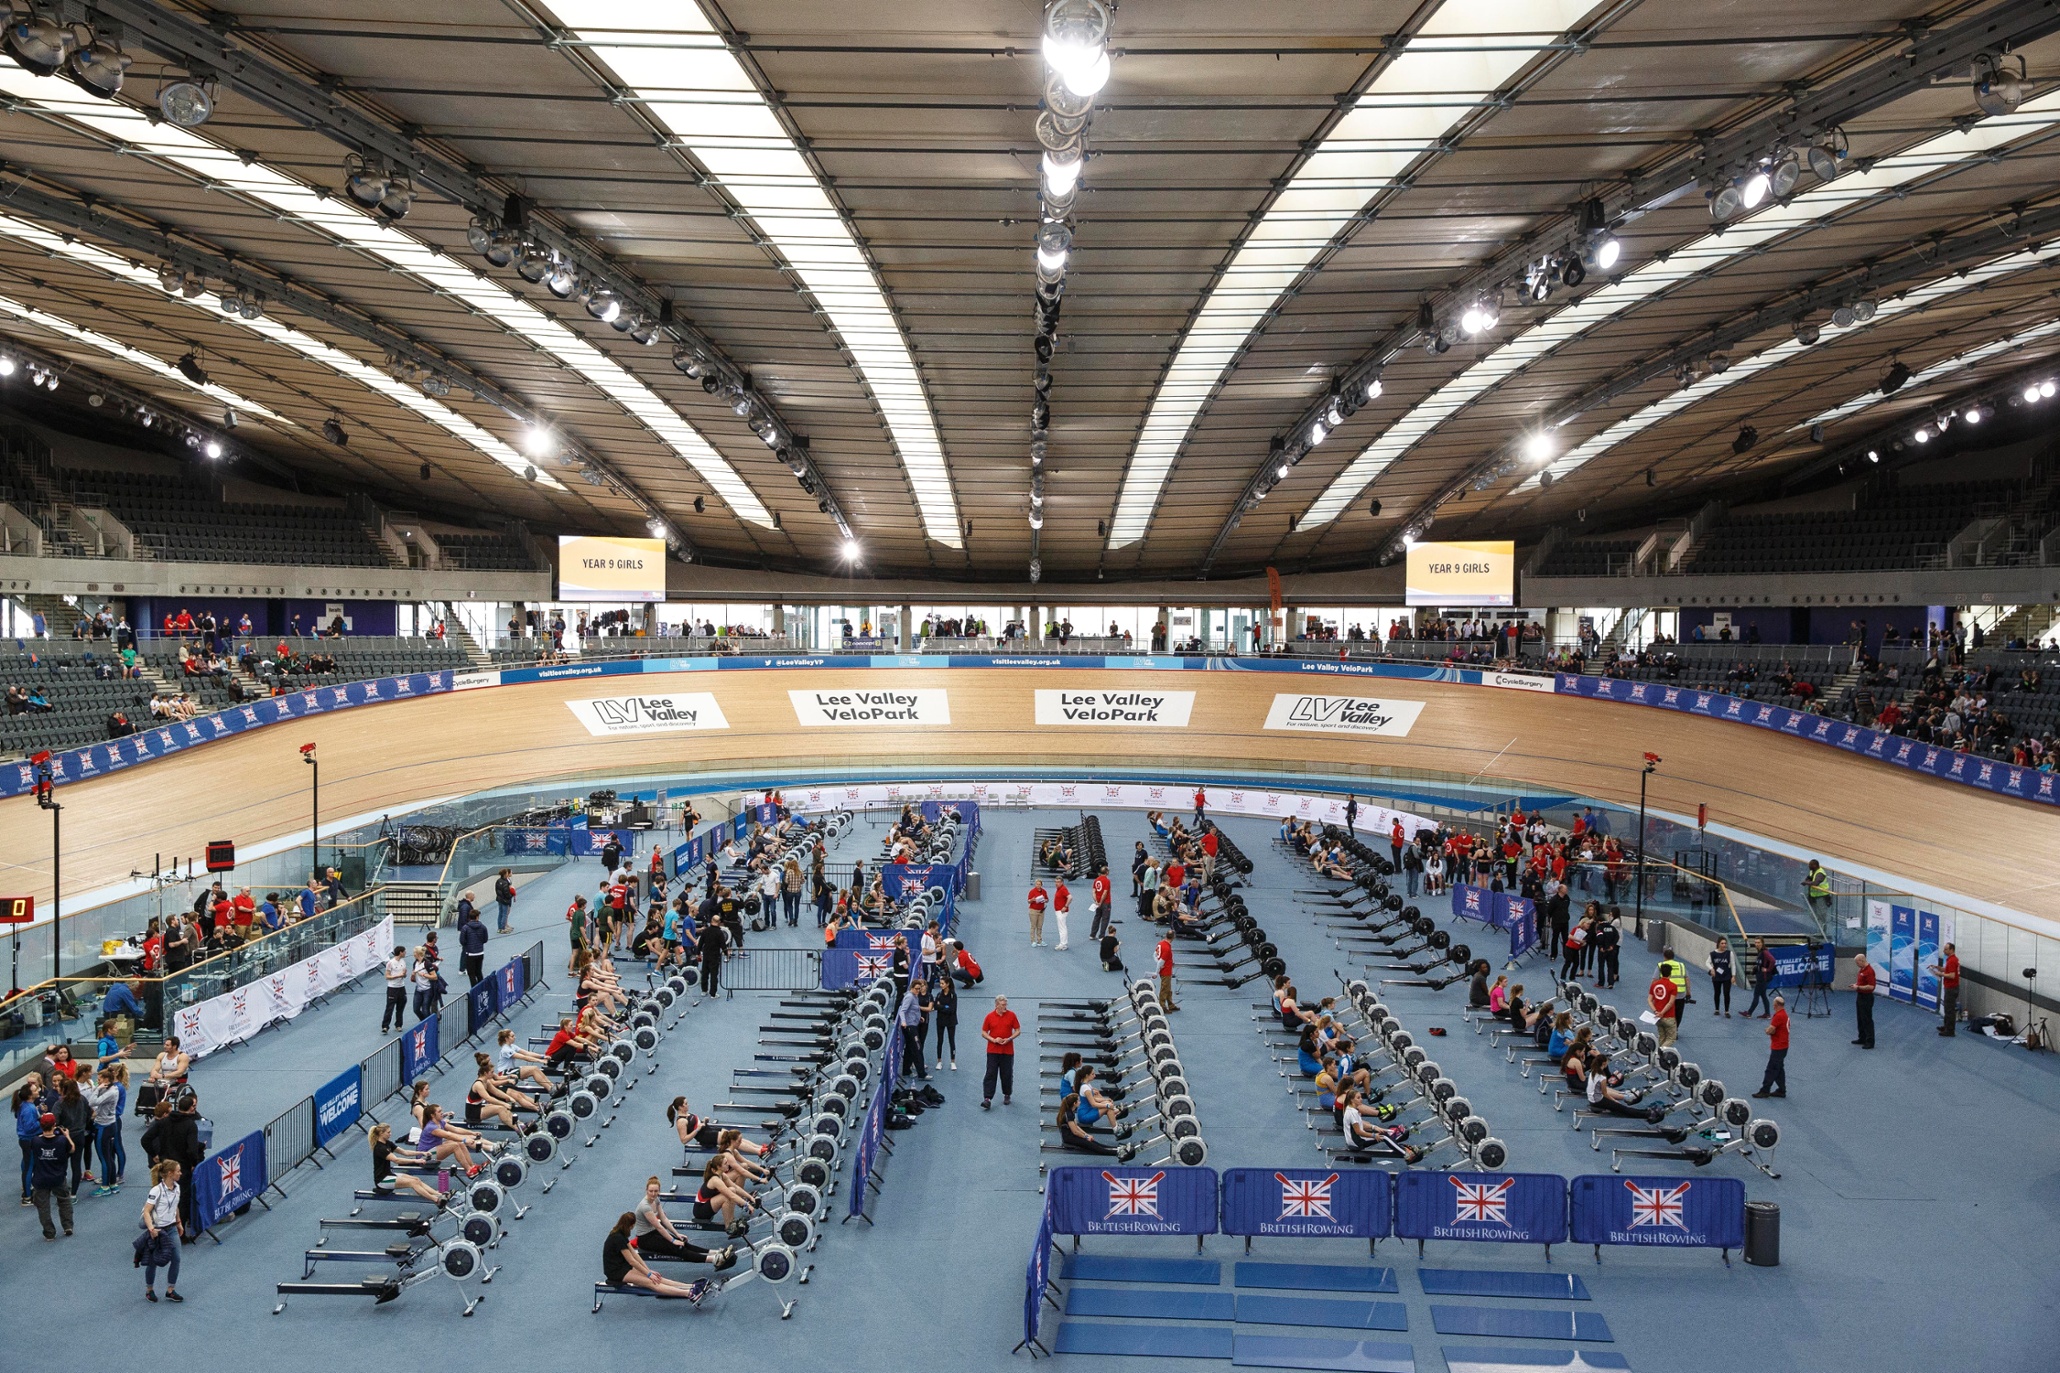 British Indoor Rowing Championships in pictures Sport The Guardian